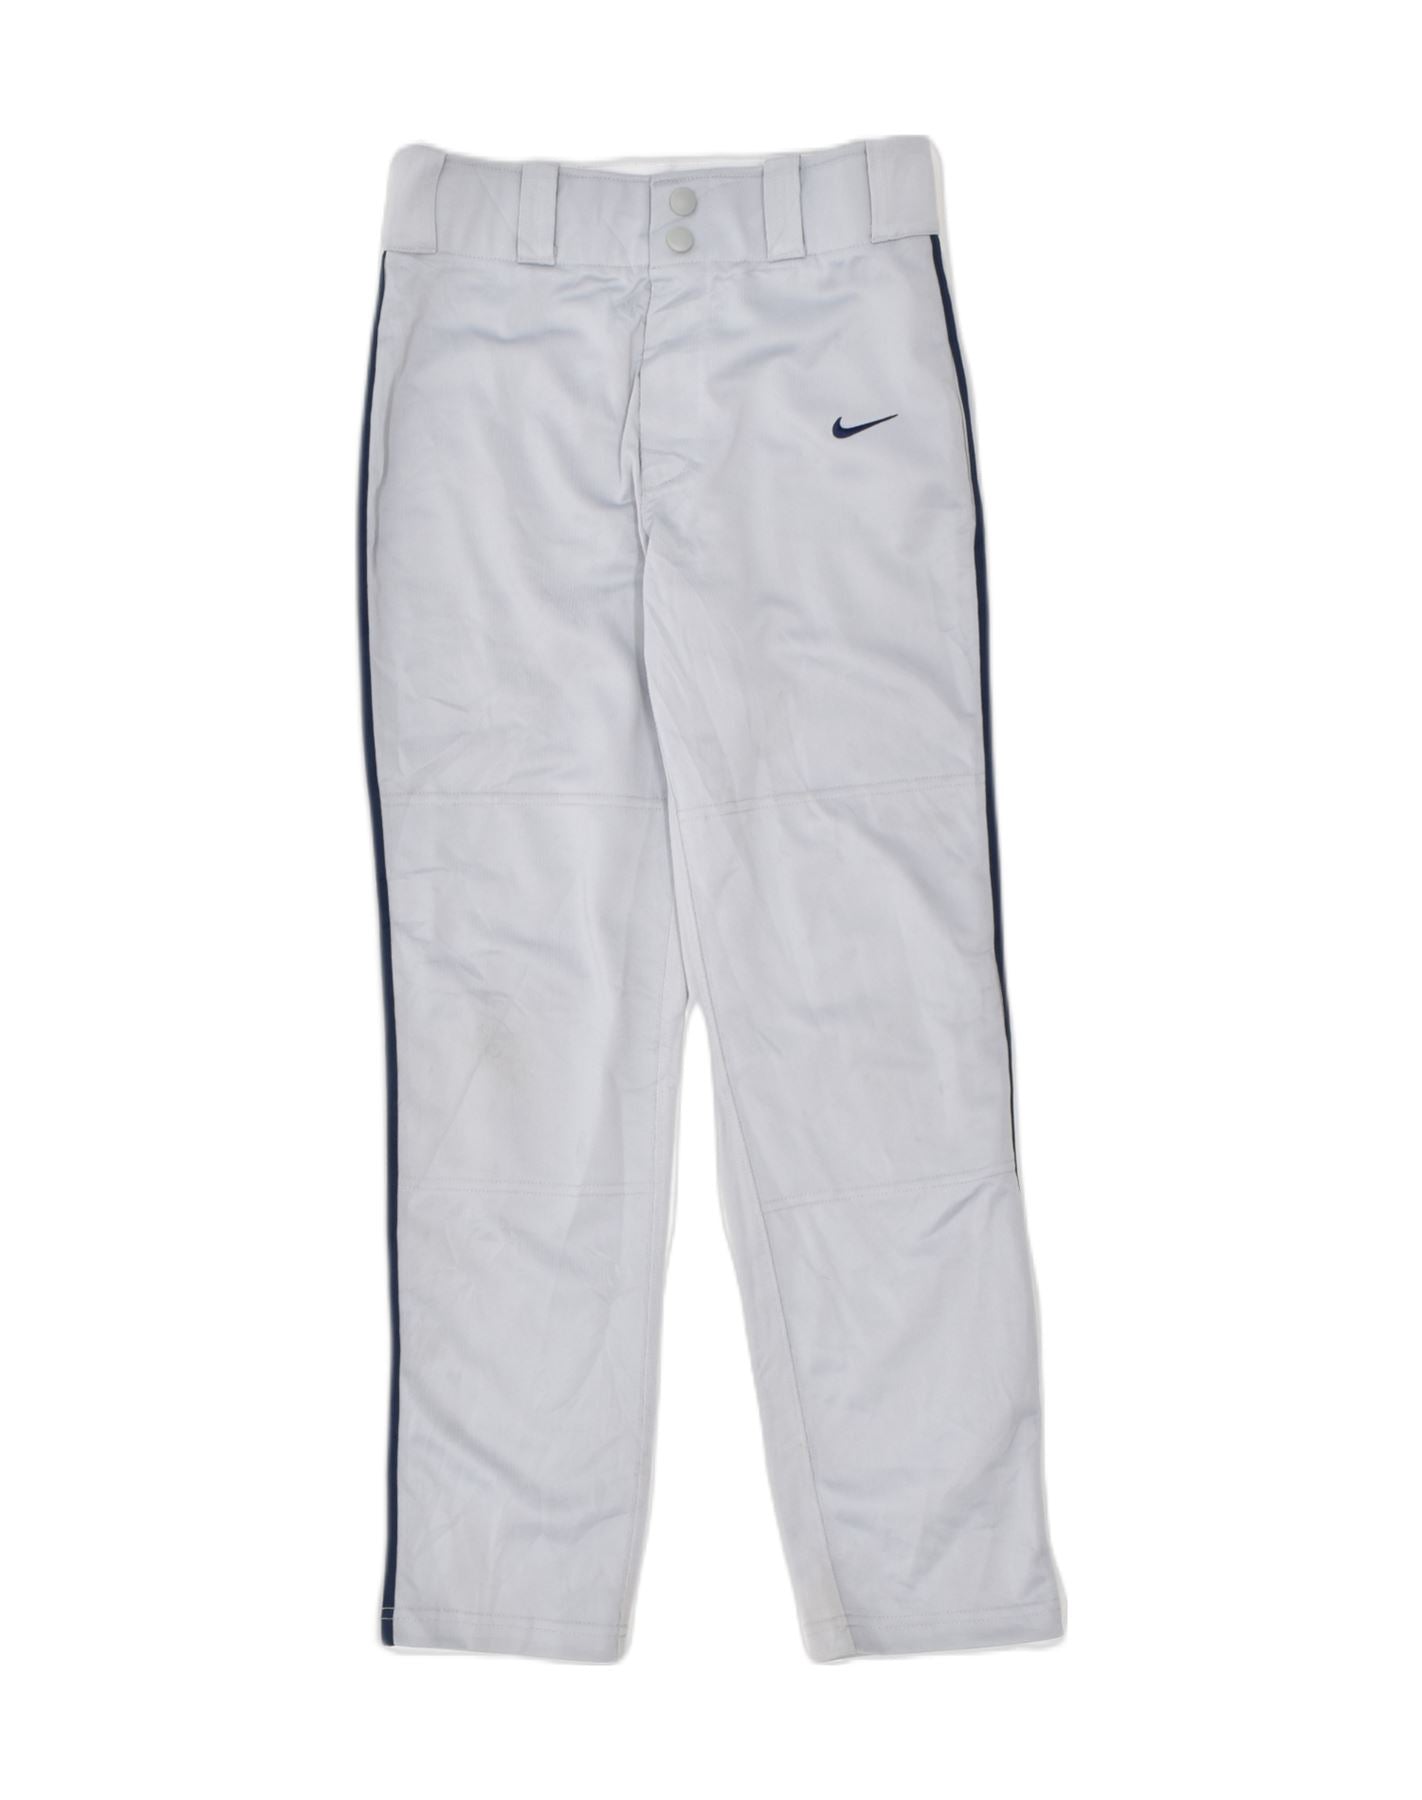 Buy nike pants for men under 500 boys in India @ Limeroad | page 2